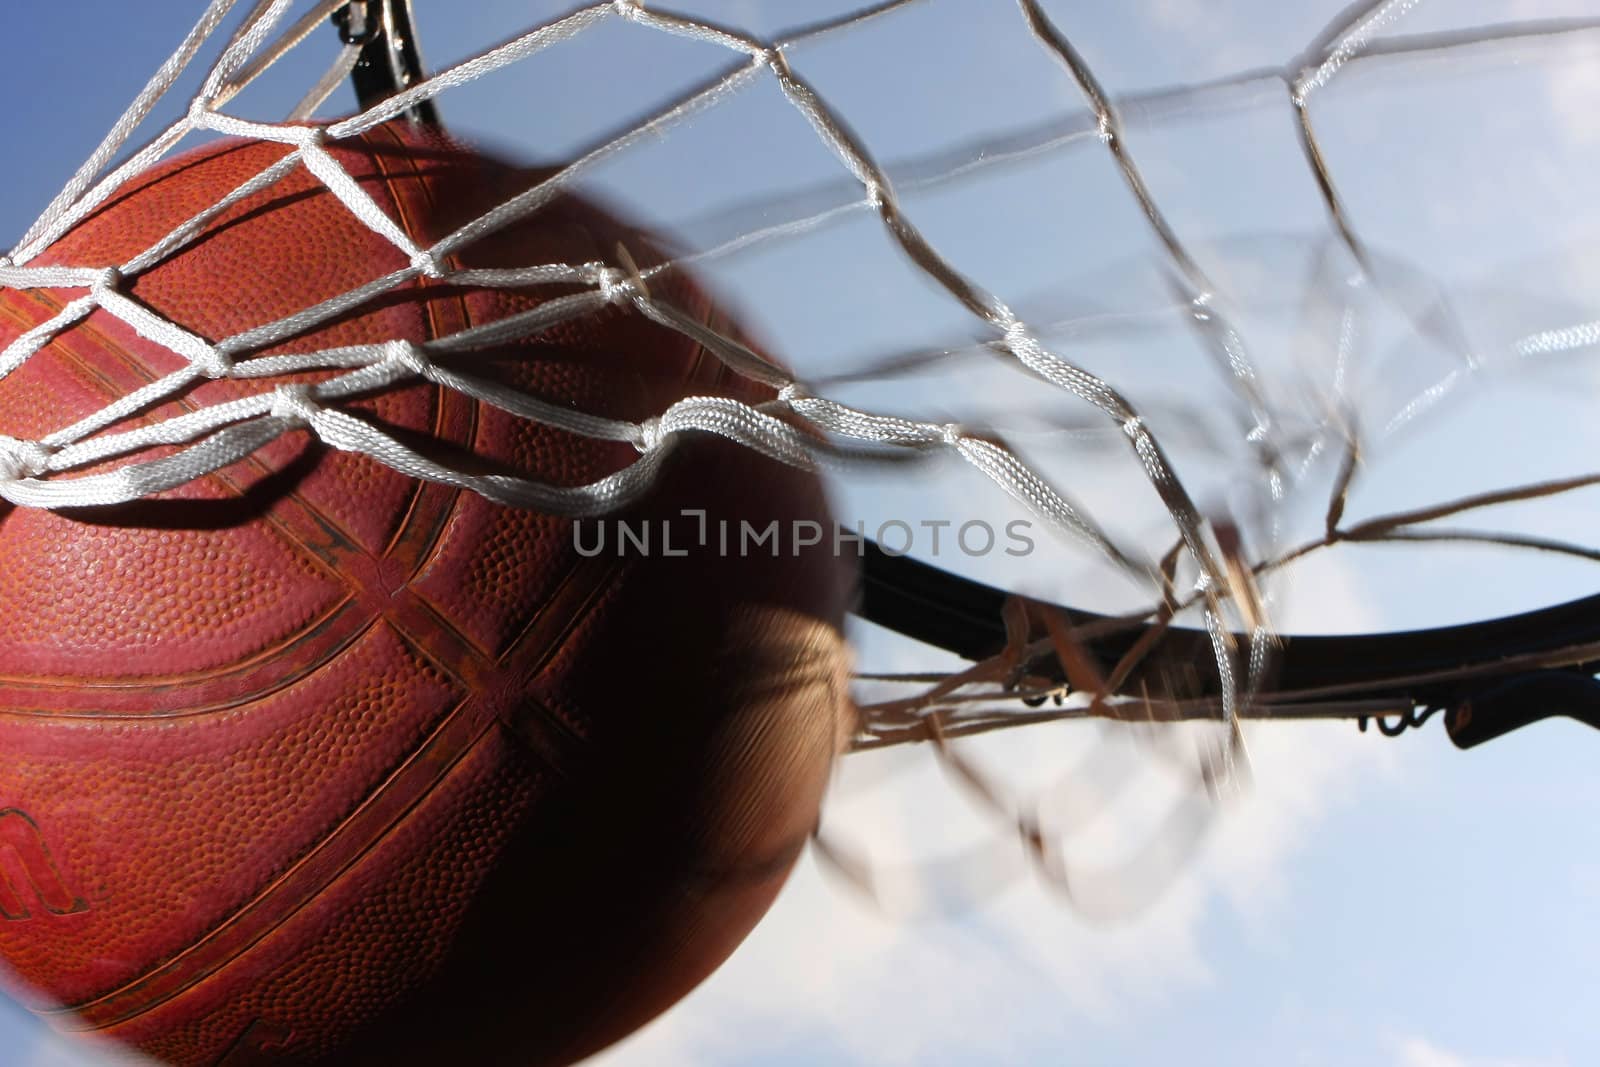 Picture of a basketball field goal with the sky in background.